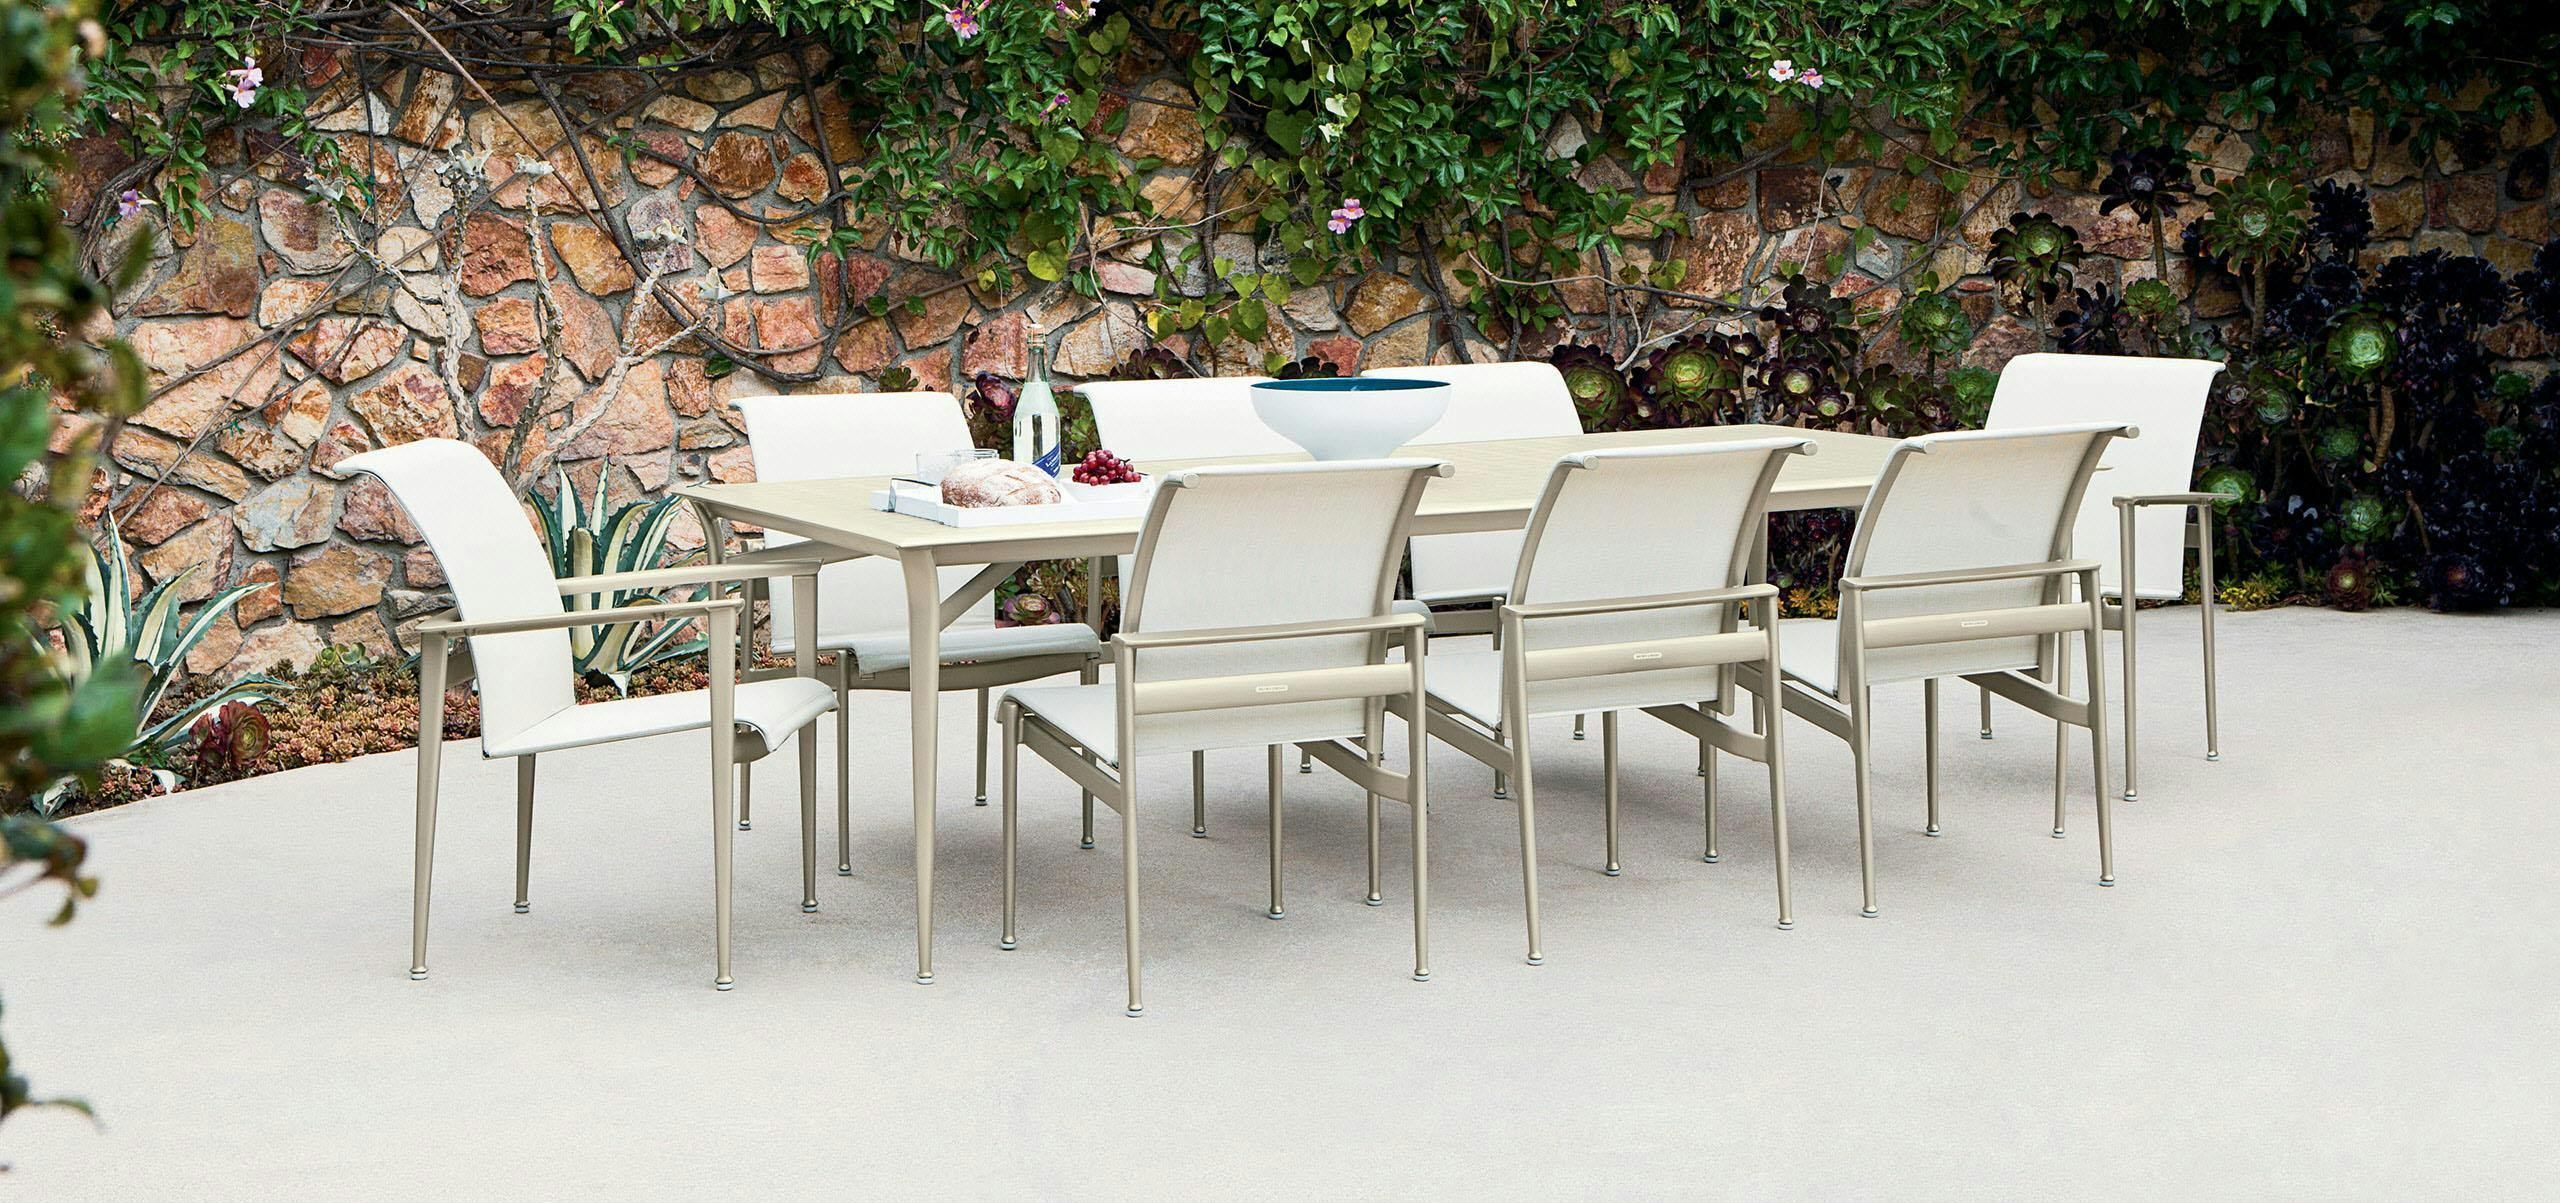 High-End Patio Furniture Options for Spring